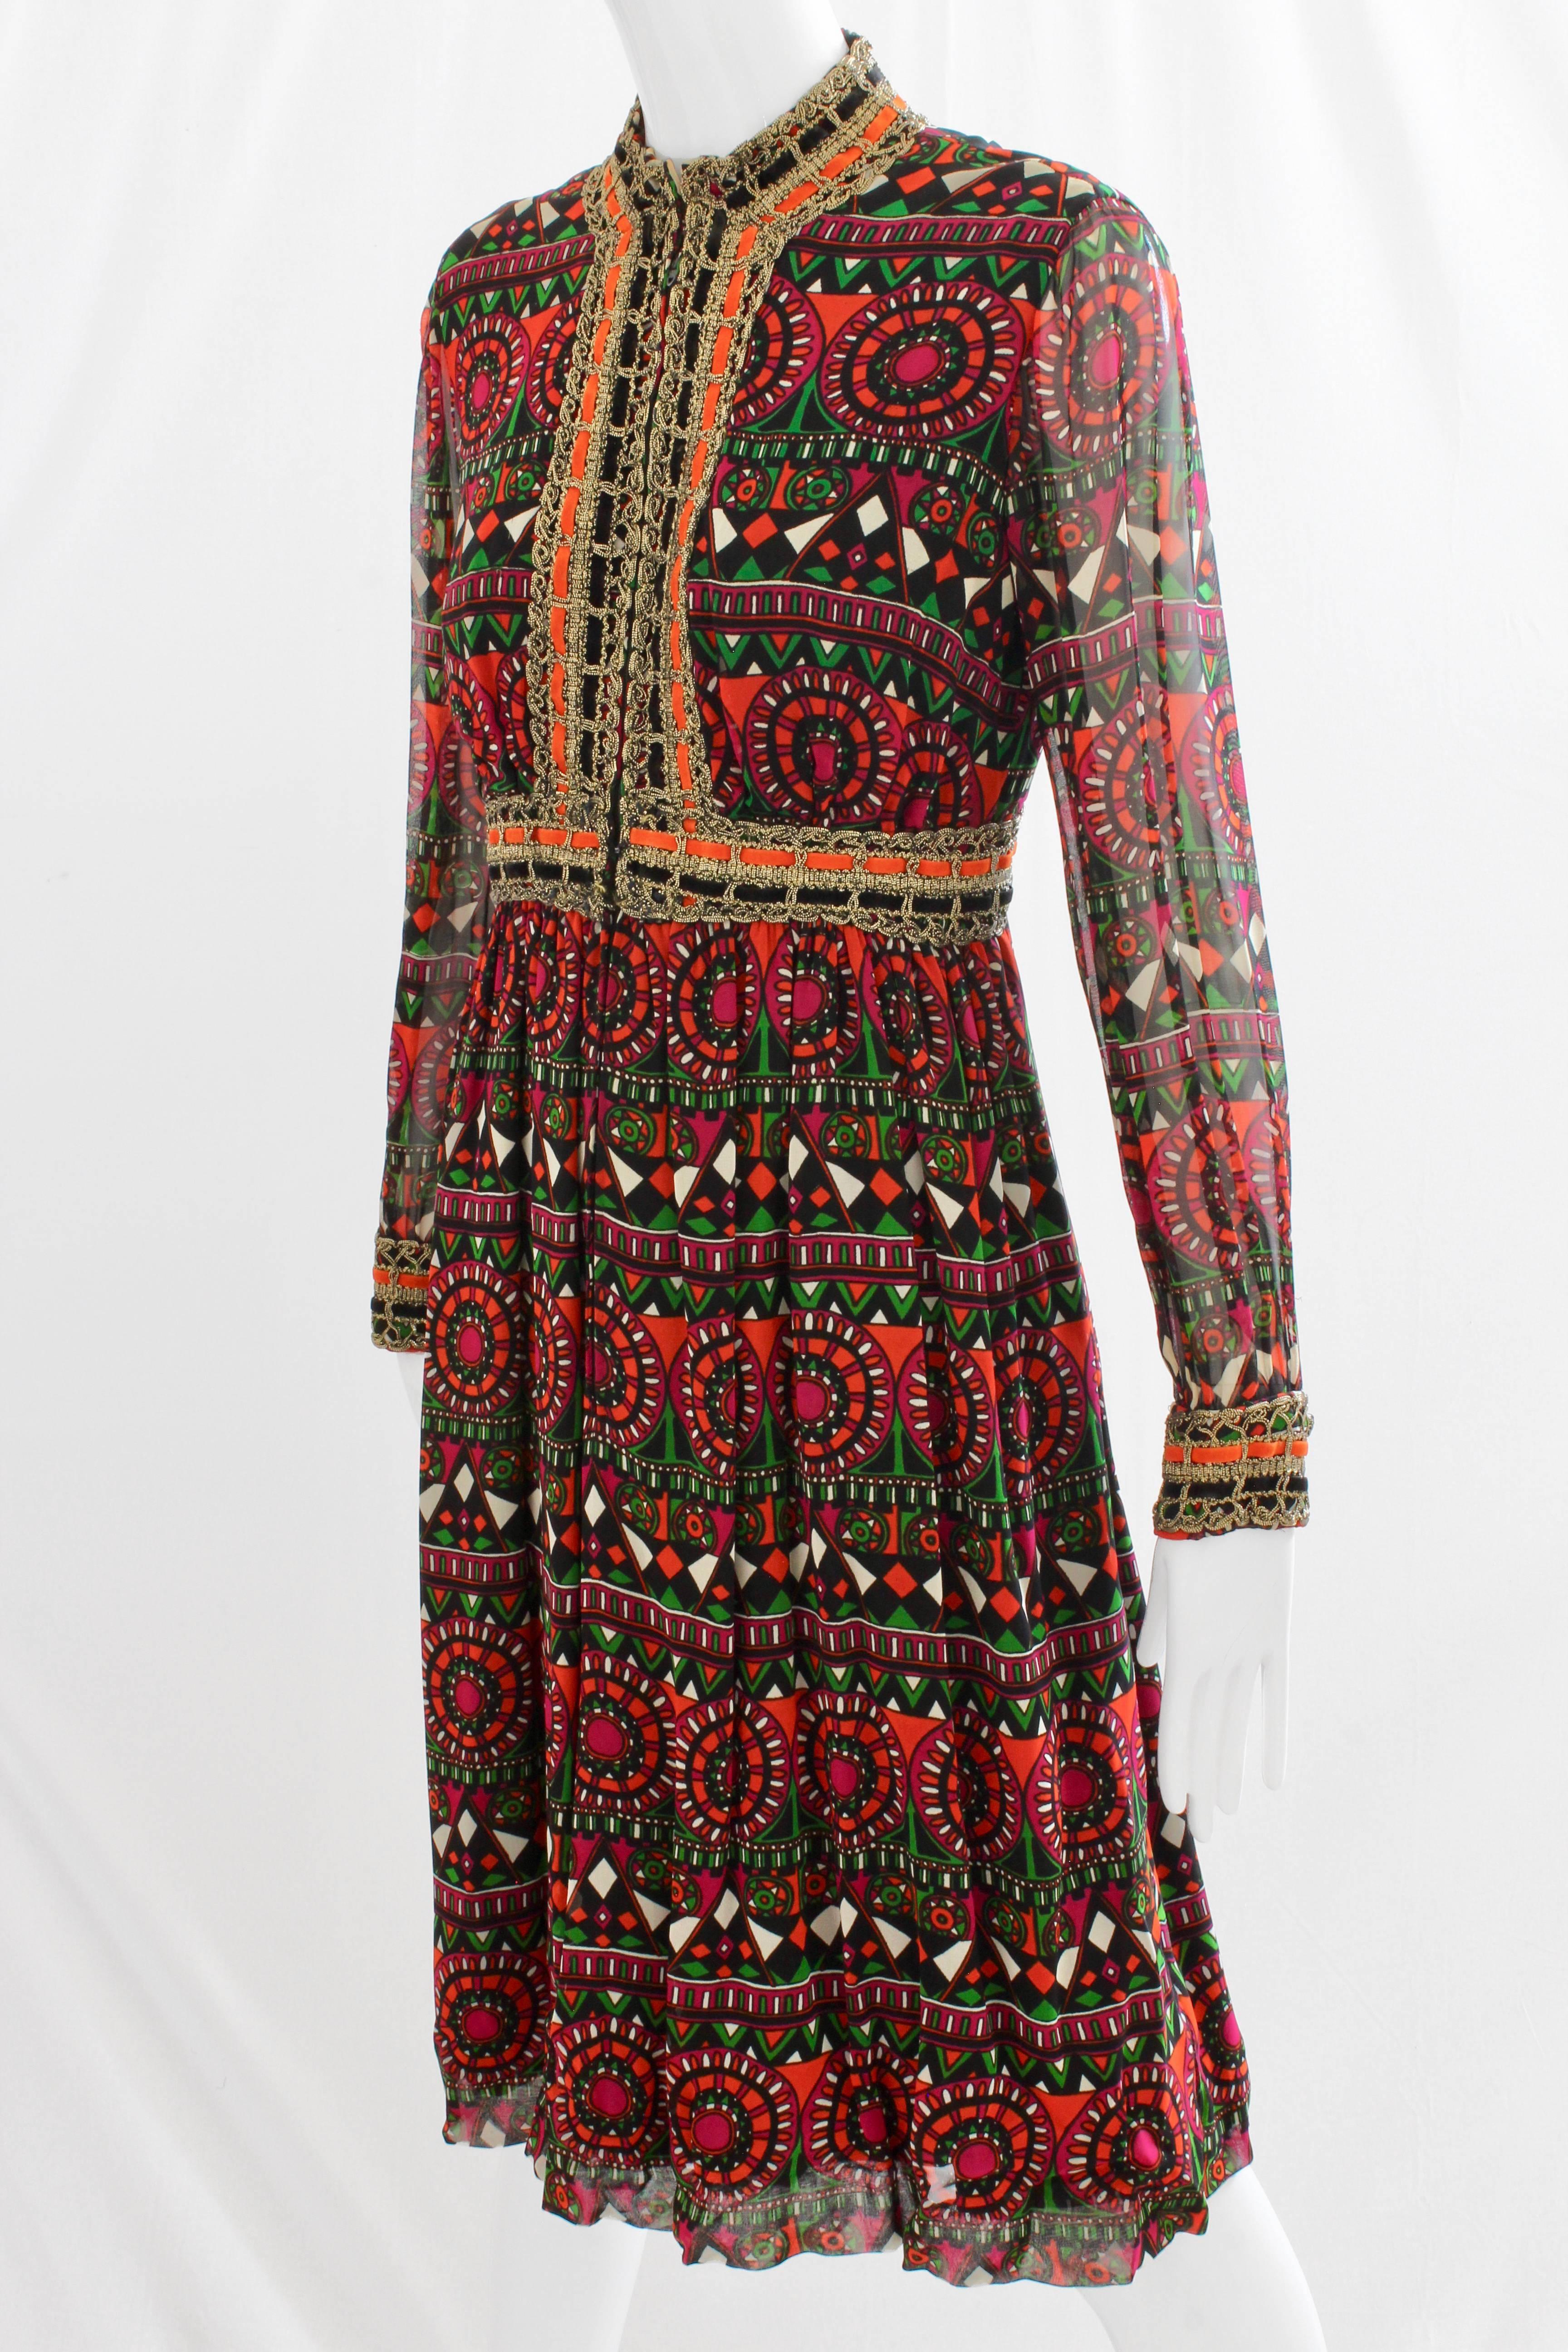 Brown Burke-Amey Abstract Print Silk Jersey Dress with Metallic Rope Detail 1960s S